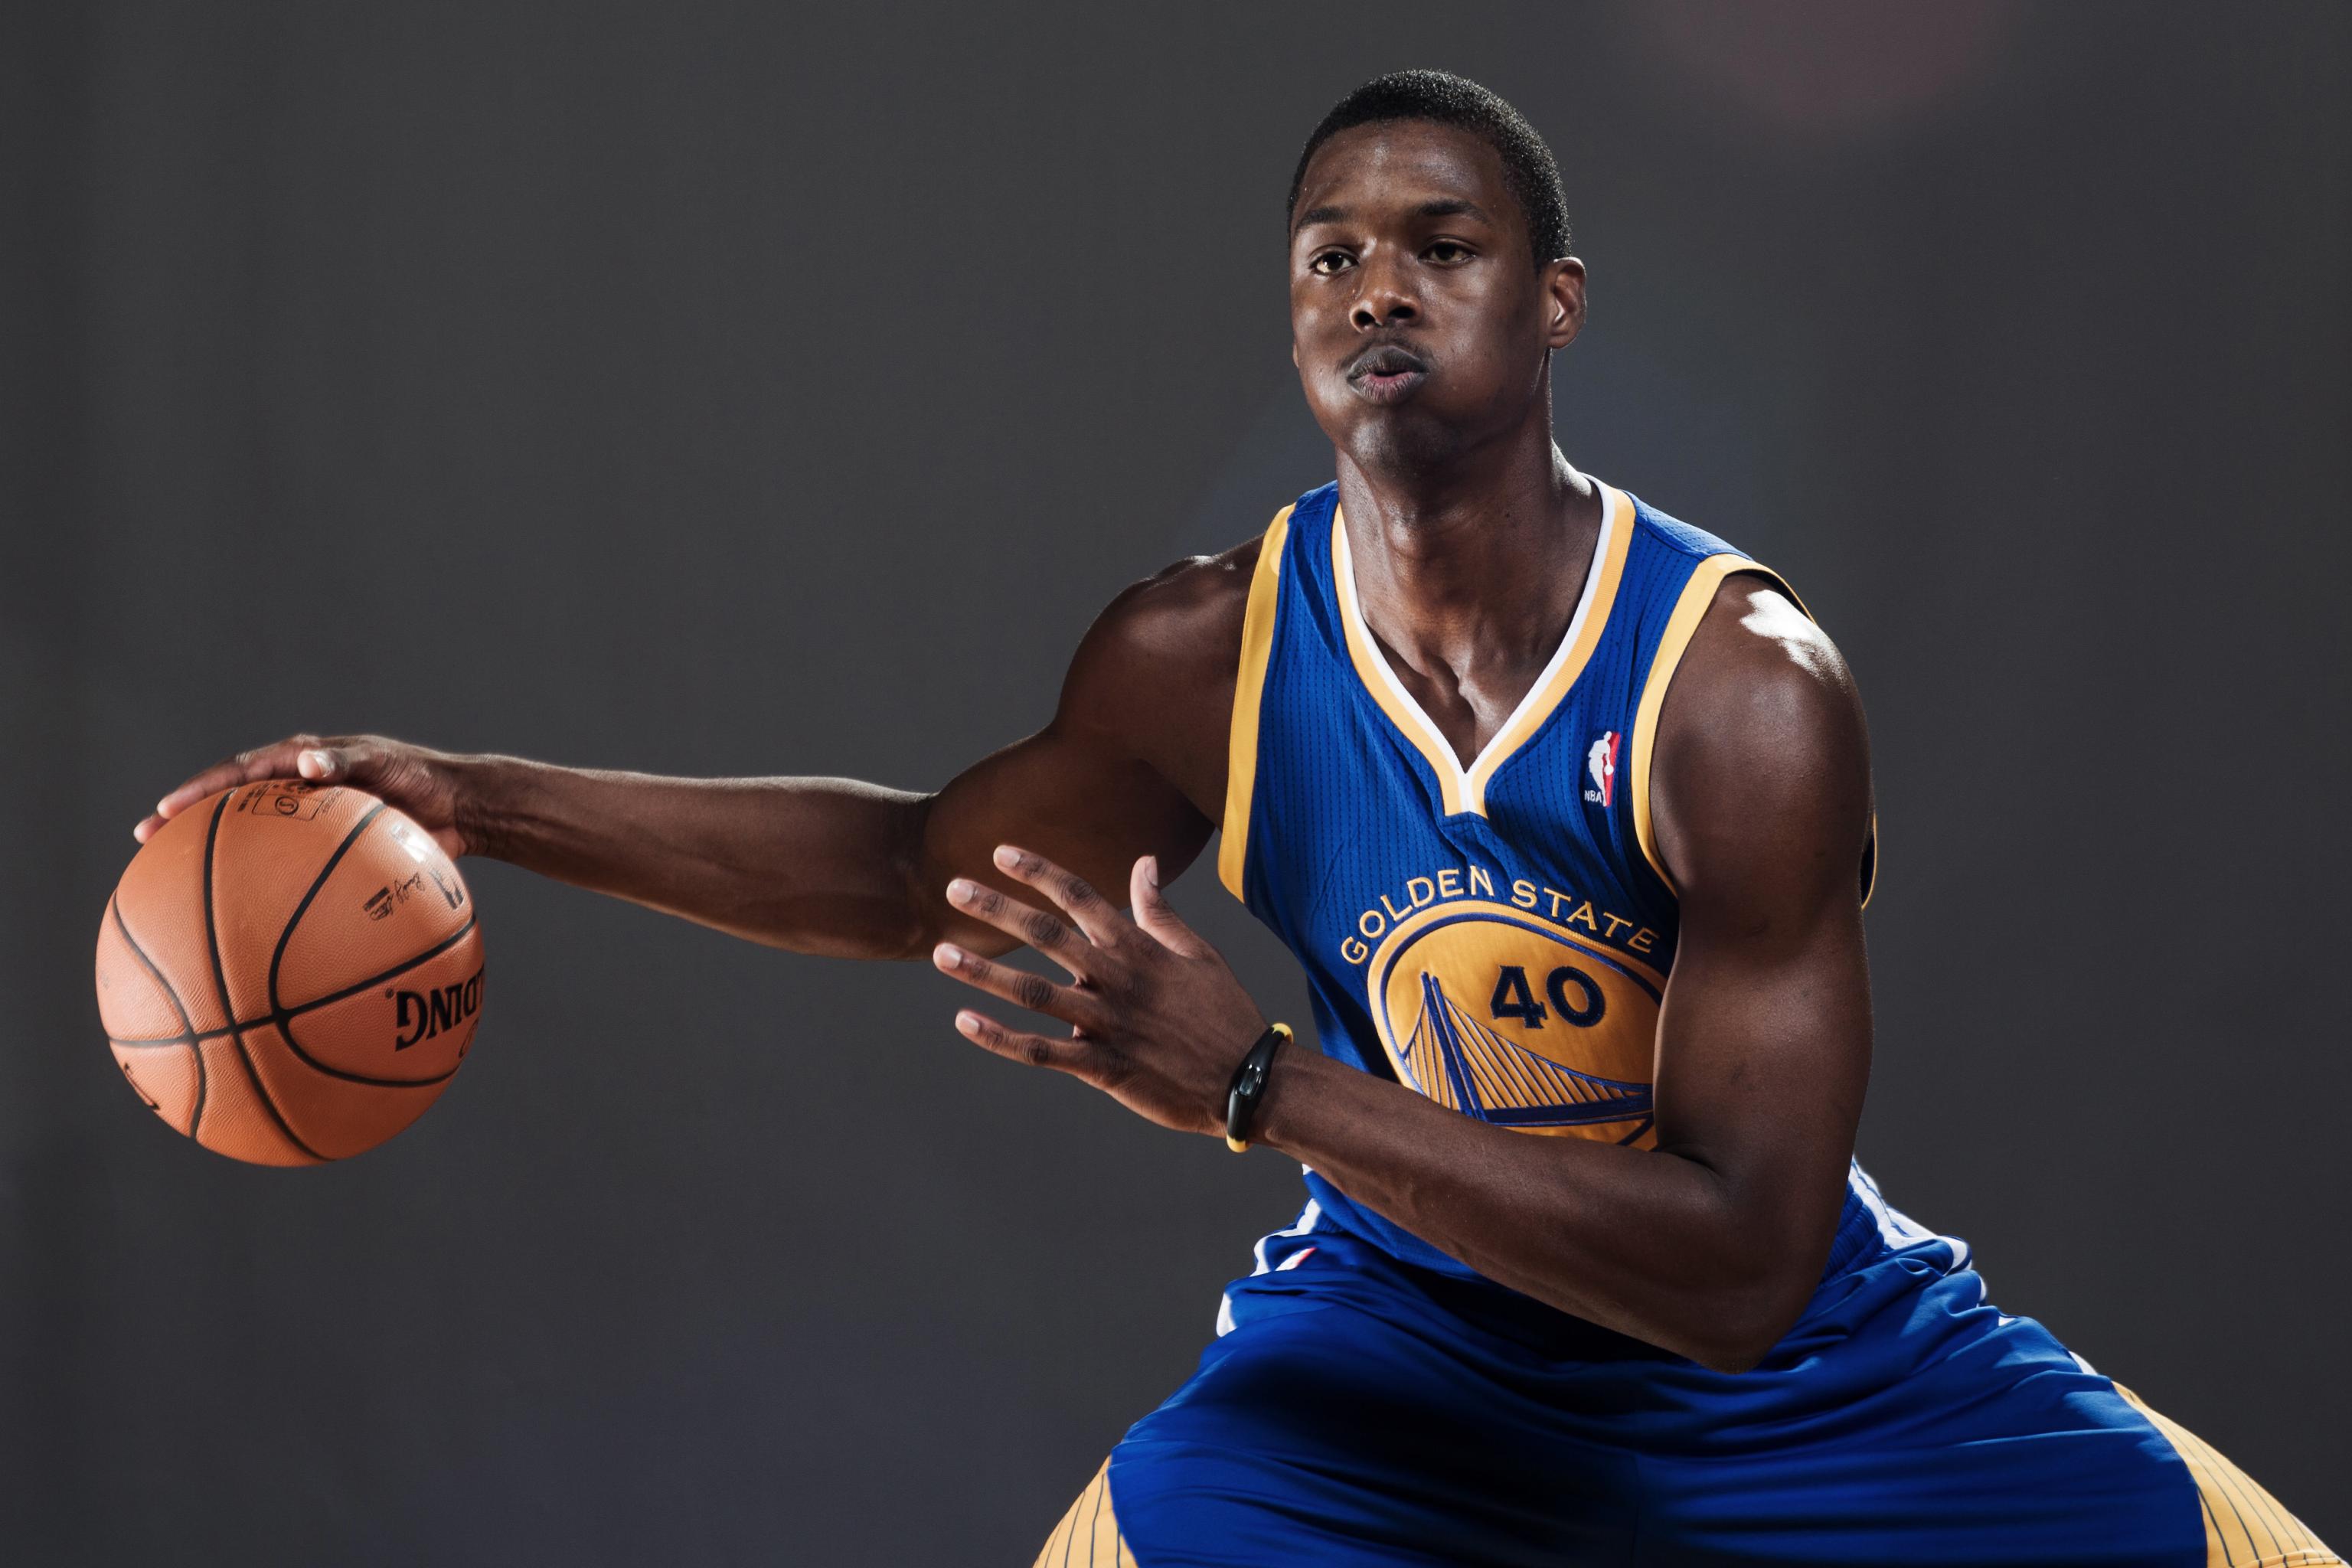 Harrison Barnes, Scouting report and accolades